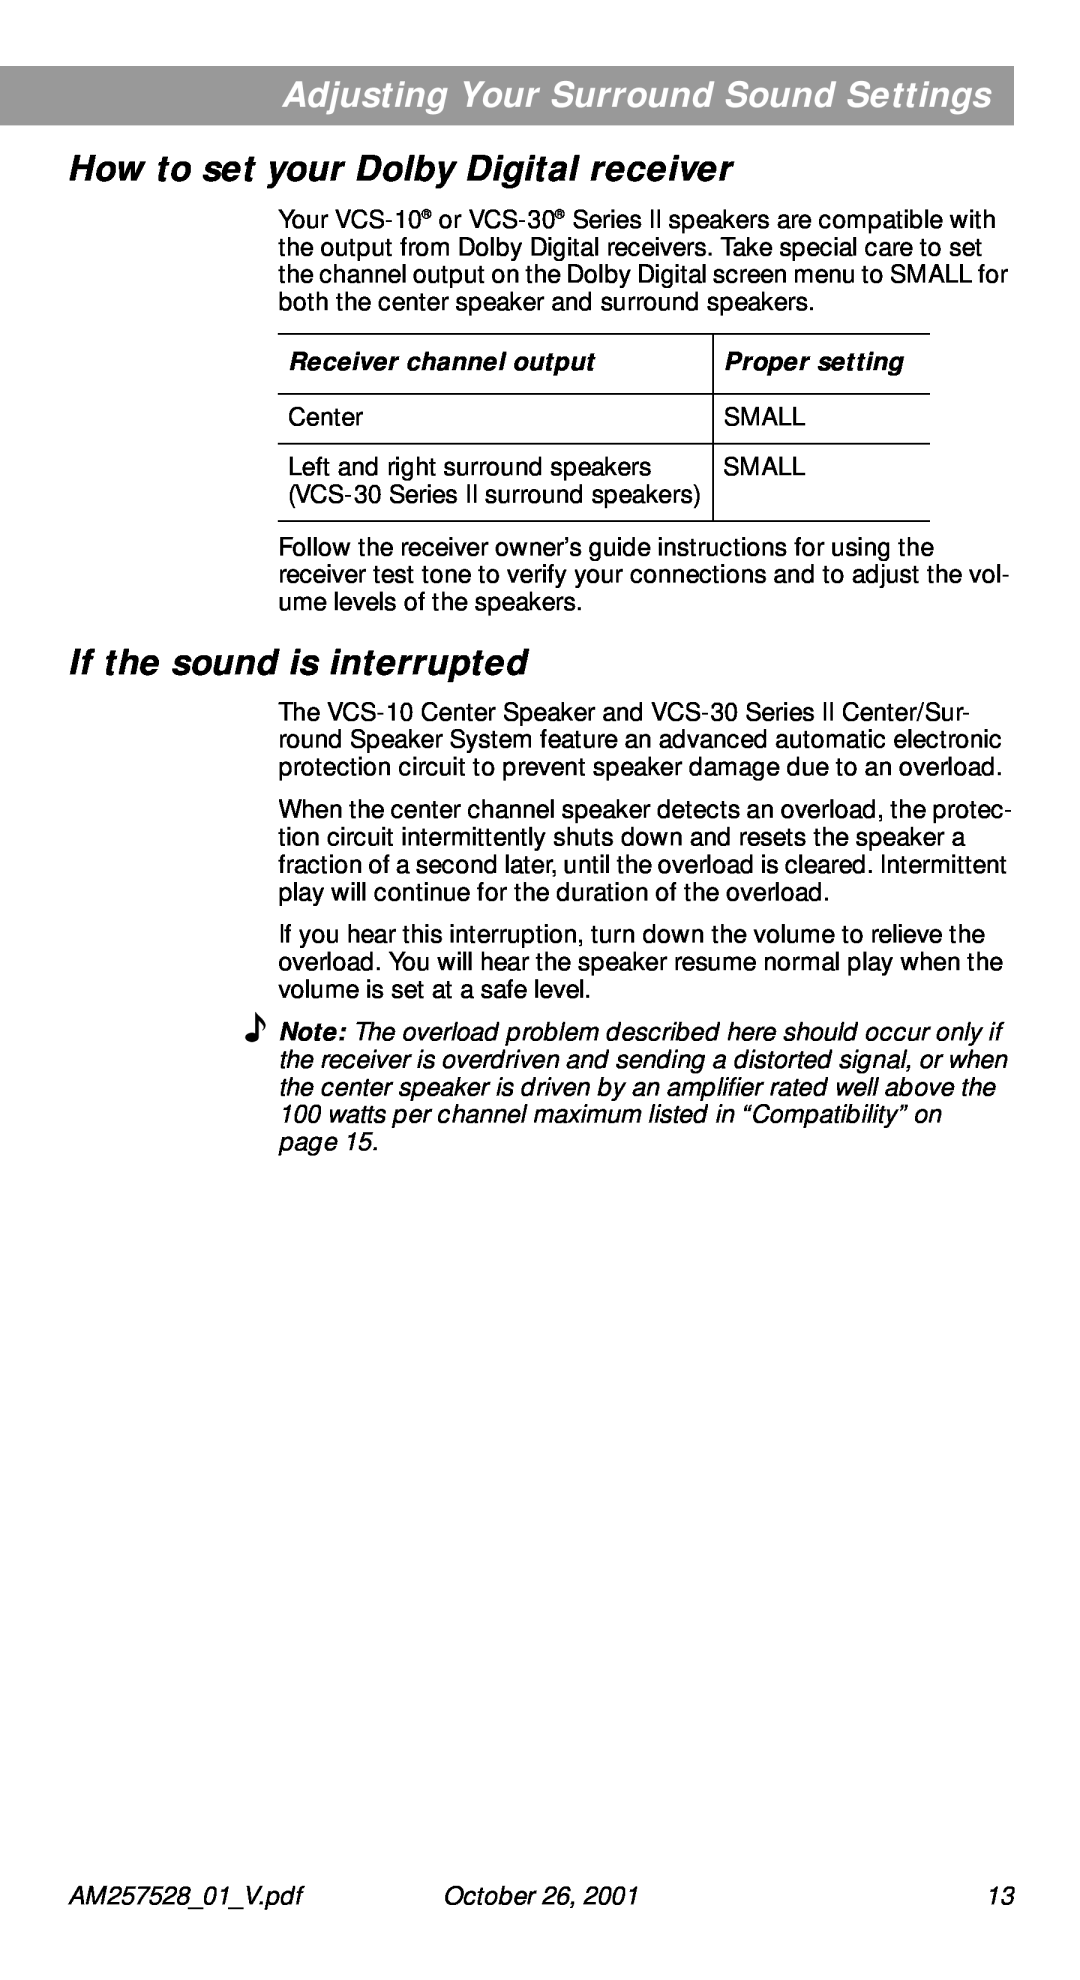 Bose 30 Series II How to set your Dolby Digital receiver, If the sound is interrupted, Receiver channel output, October 